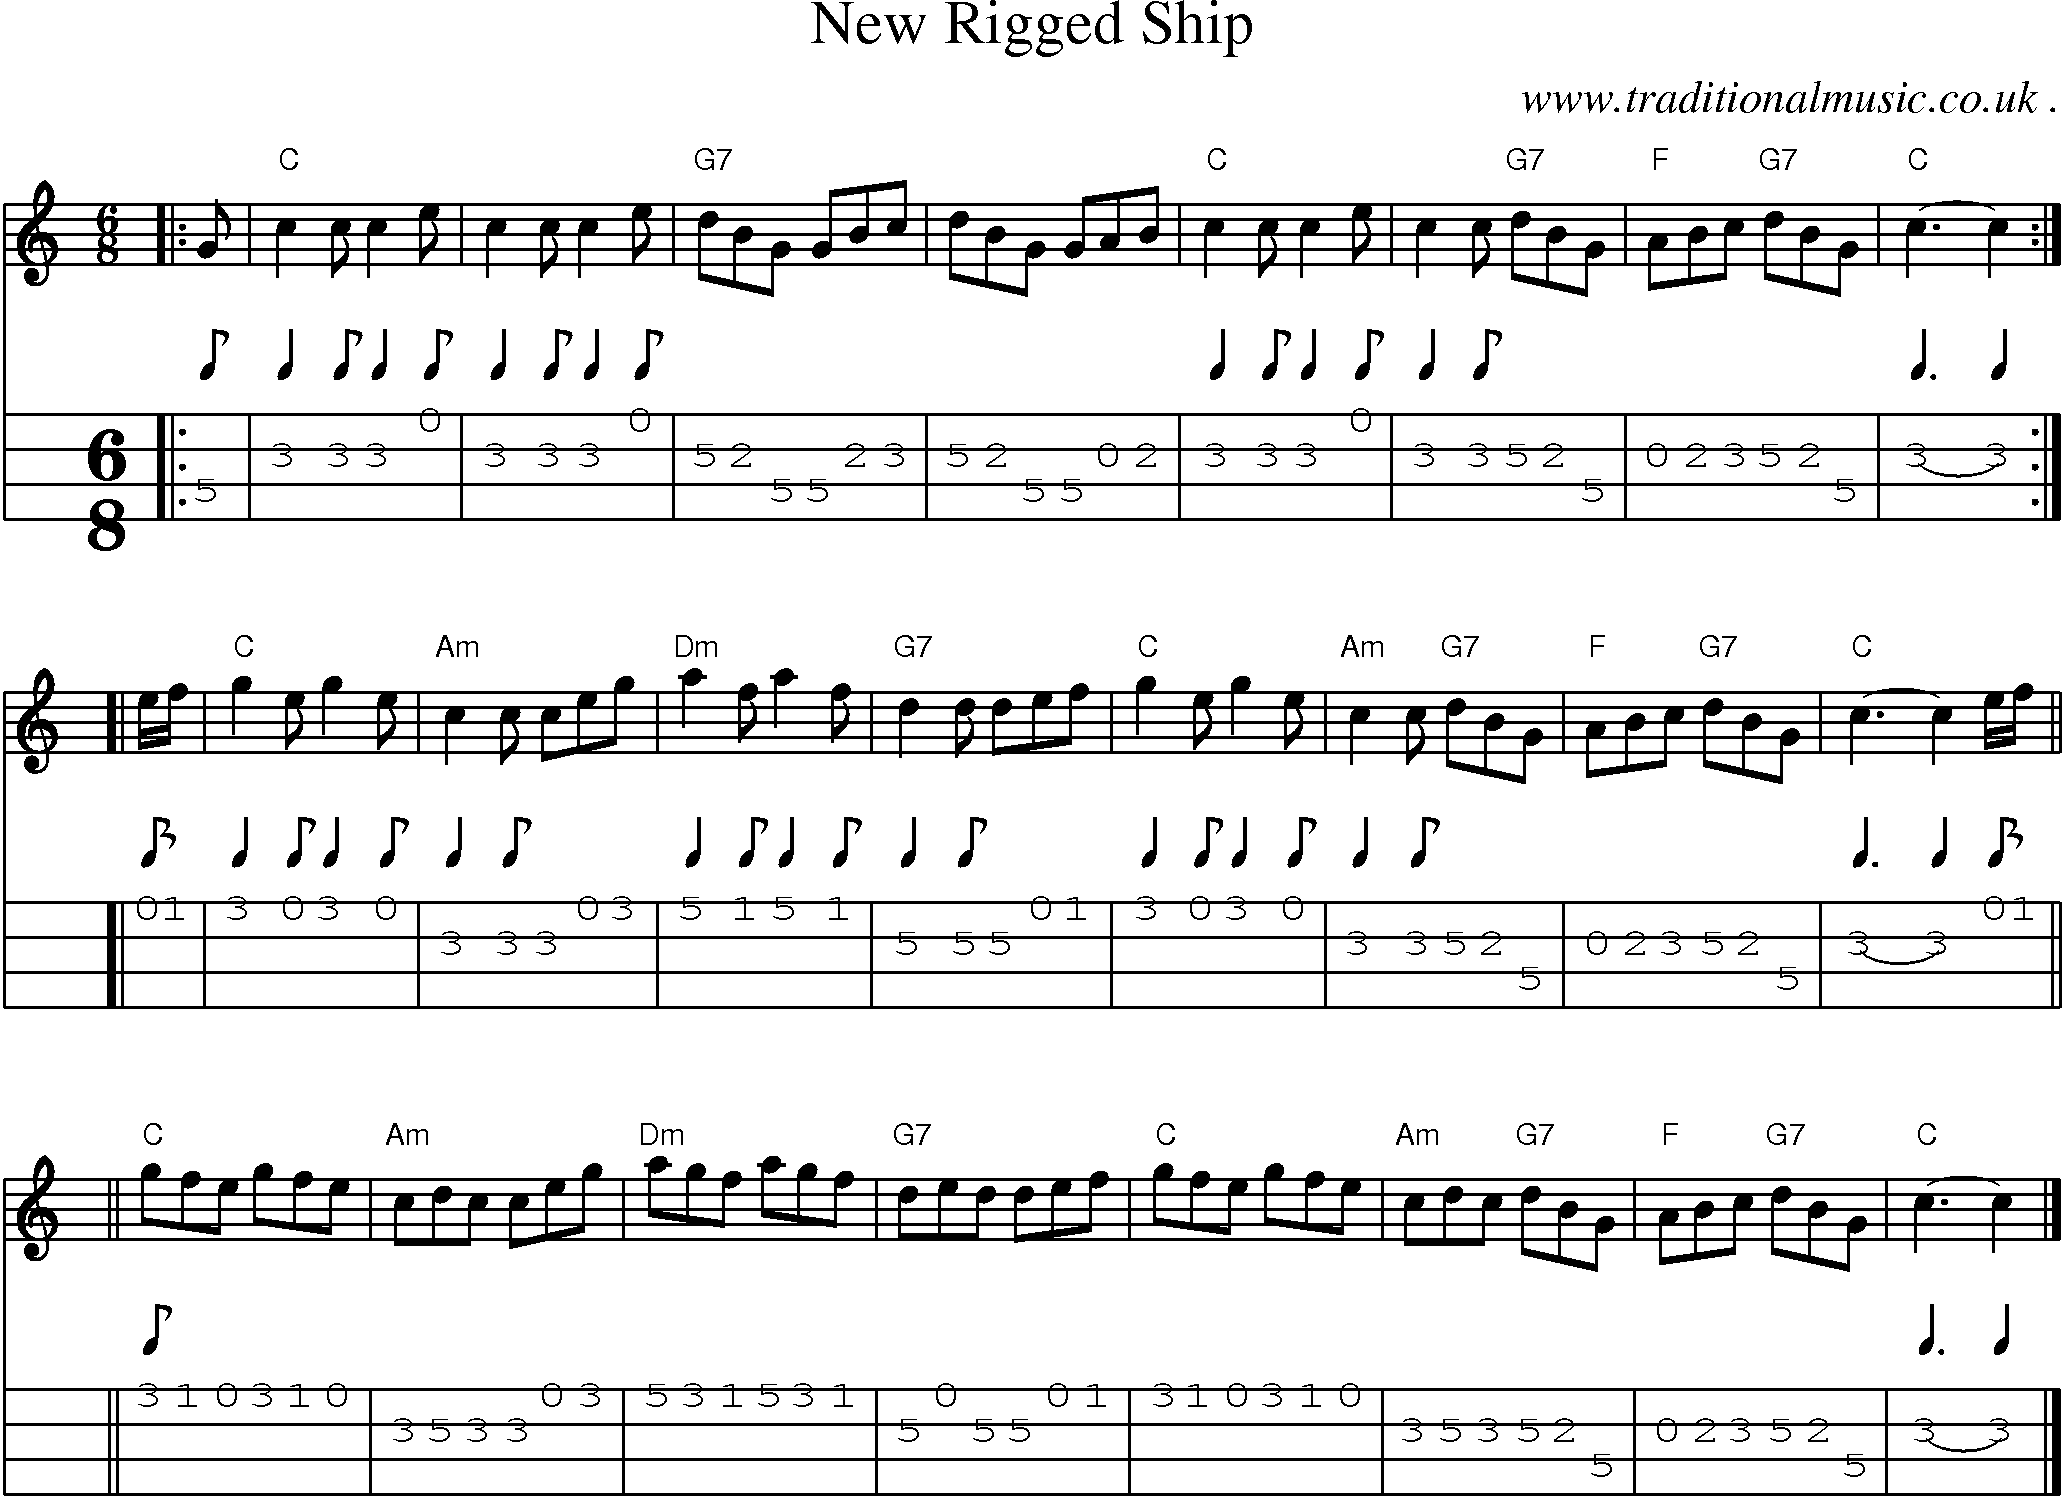 Sheet-music  score, Chords and Mandolin Tabs for New Rigged Ship